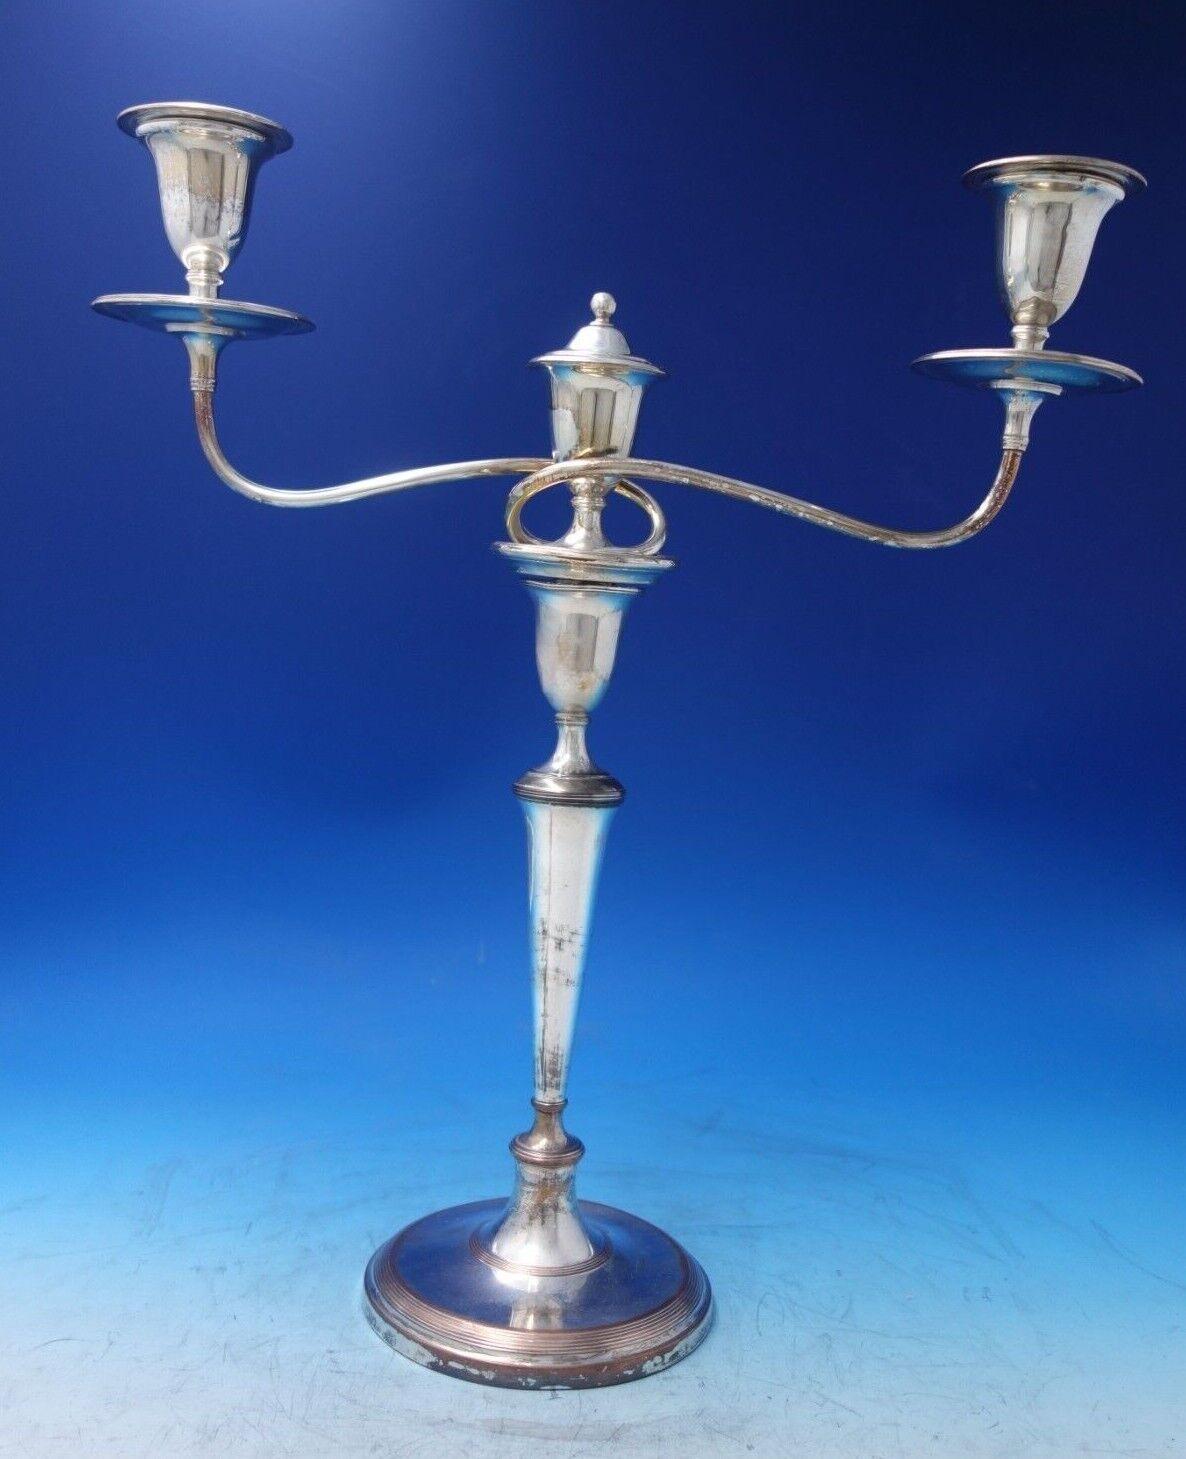 Wonderful English Georgian silver on copper candelabra pair, circa 1790 (maker unknown). The pieces measure 15